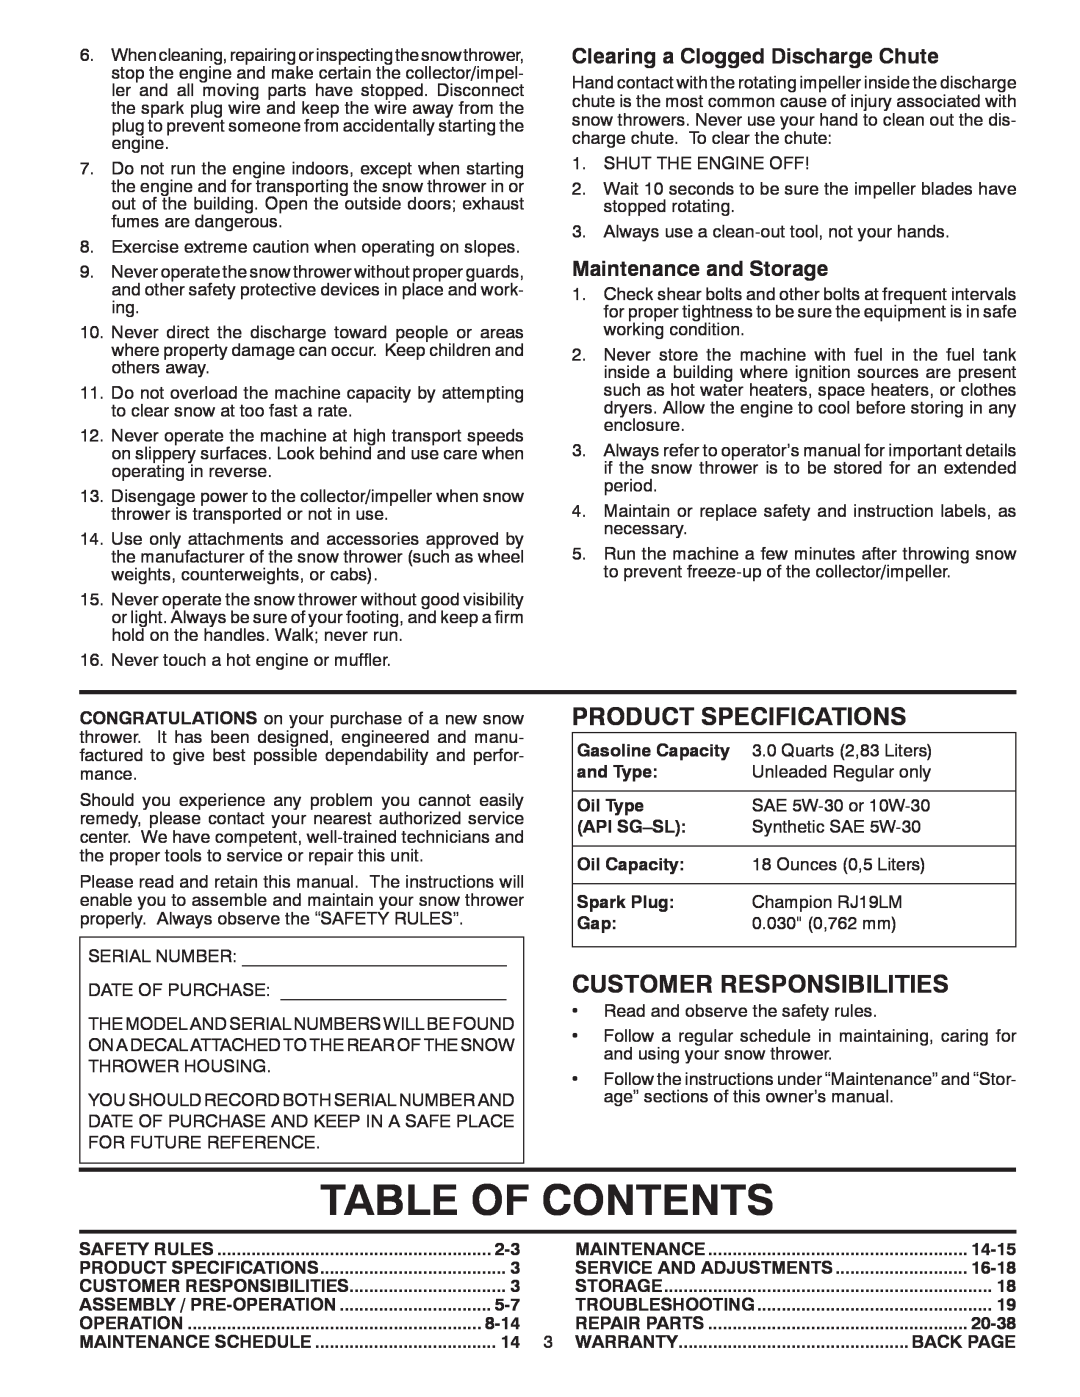 Poulan 421916 Table Of Contents, Product Specifications, Customer Responsibilities, Clearing a Clogged Discharge Chute 